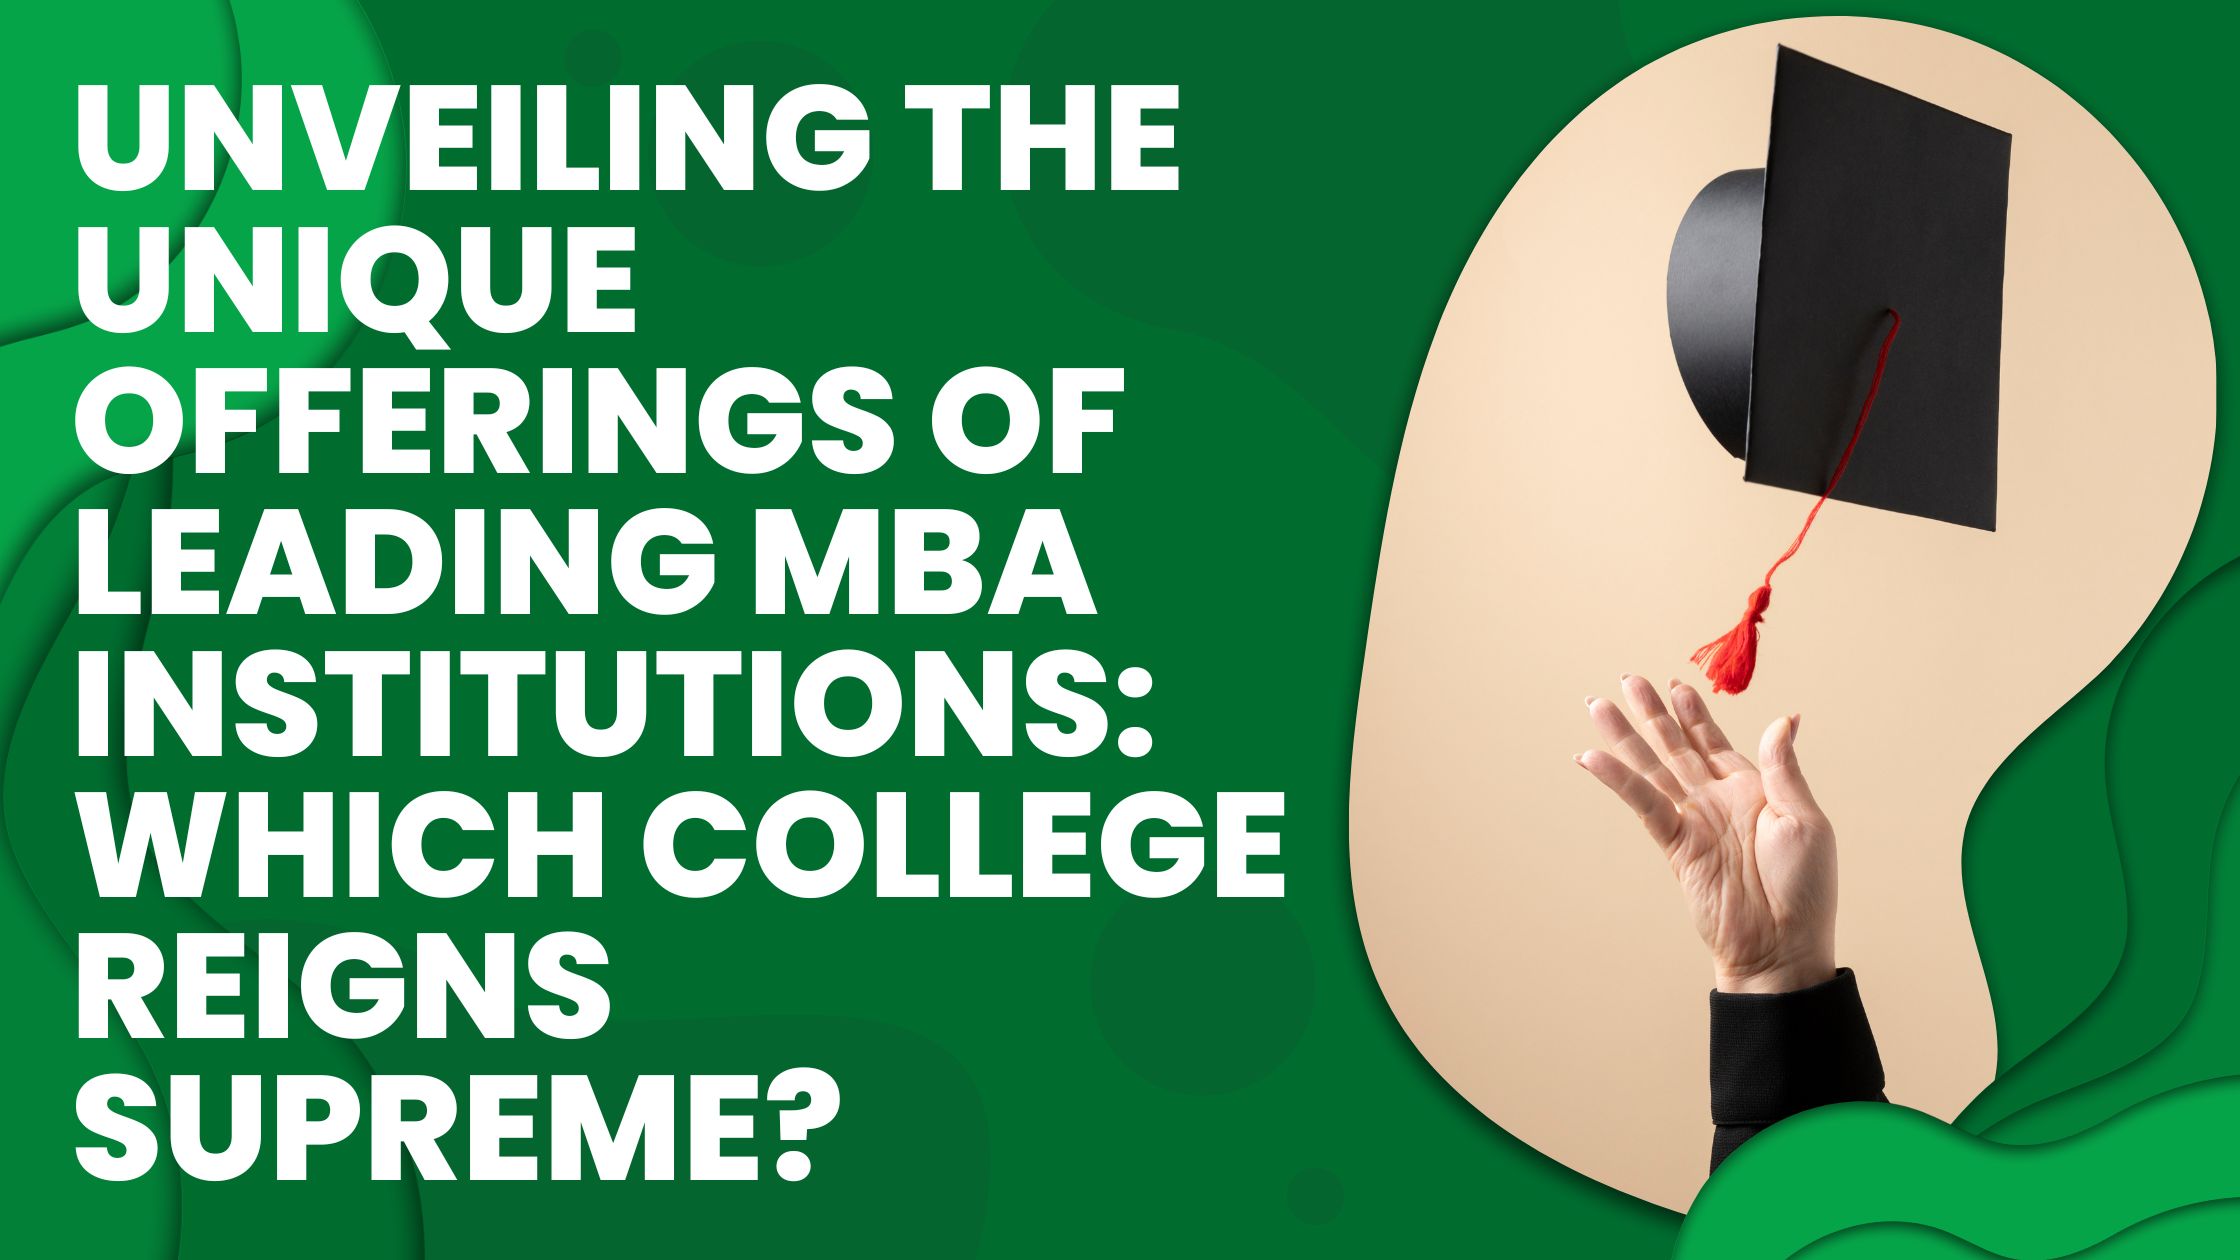 Unveiling the Unique Offerings of Leading MBA Institutions: Which College Reigns Supreme?